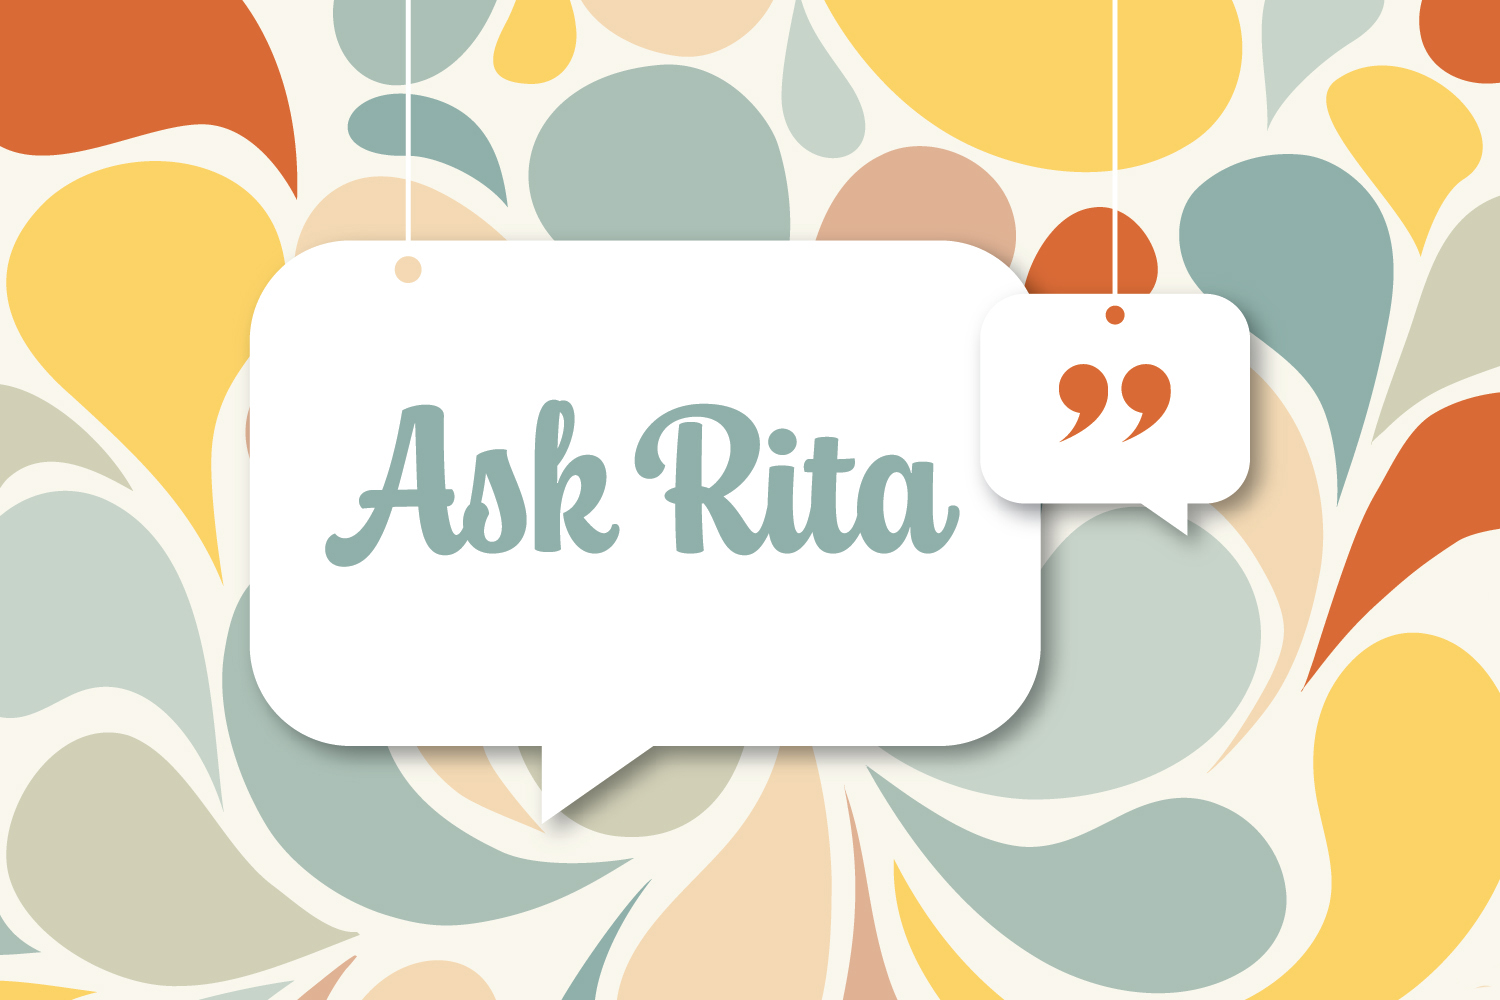 Ask Rita: How Do I Navigate Requests for Religious Exemptions from a Requirement to Receive the Covid-19 Vaccine?